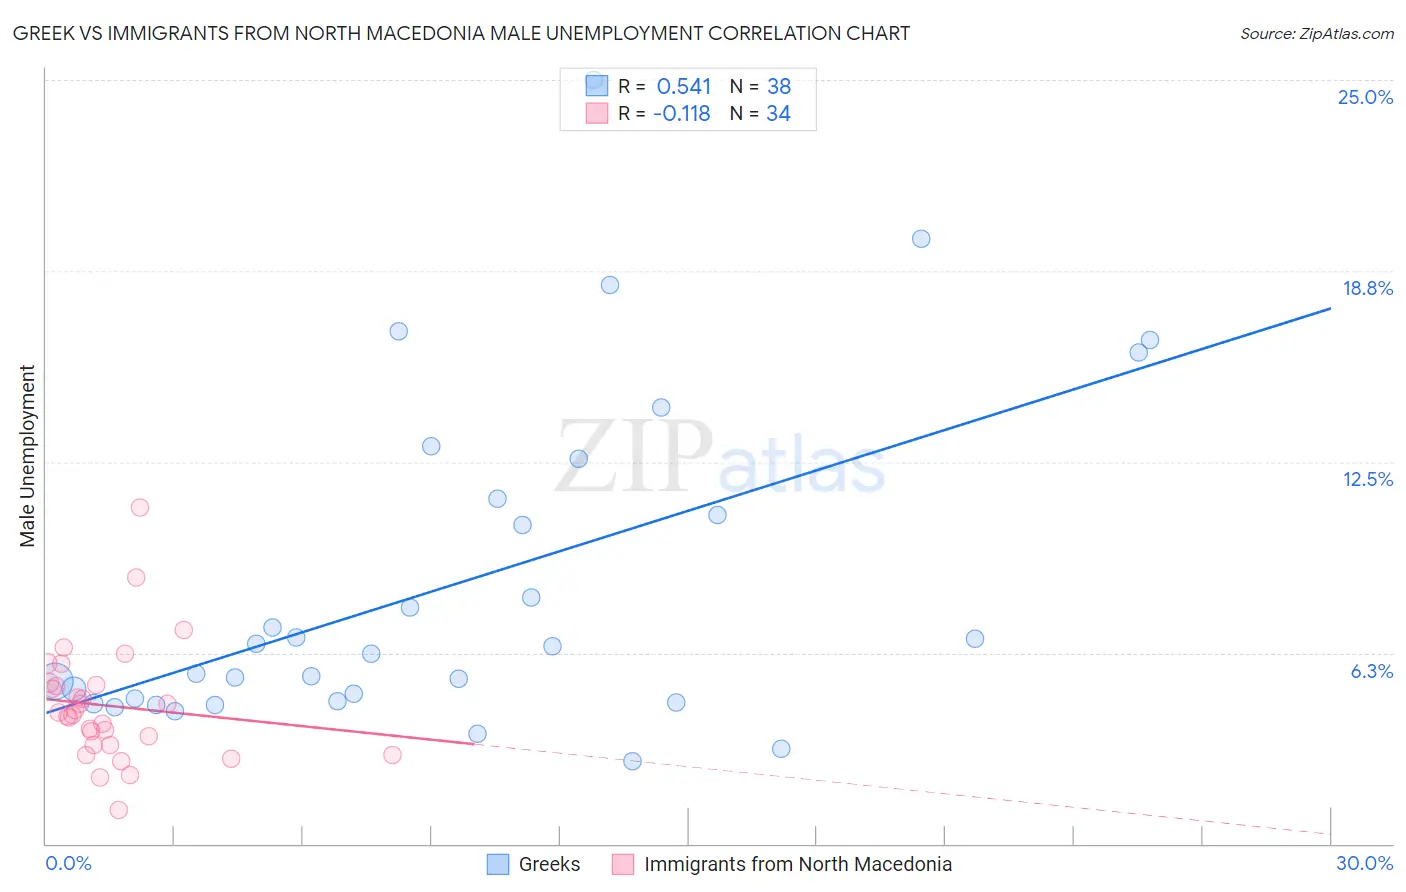 Greek vs Immigrants from North Macedonia Male Unemployment